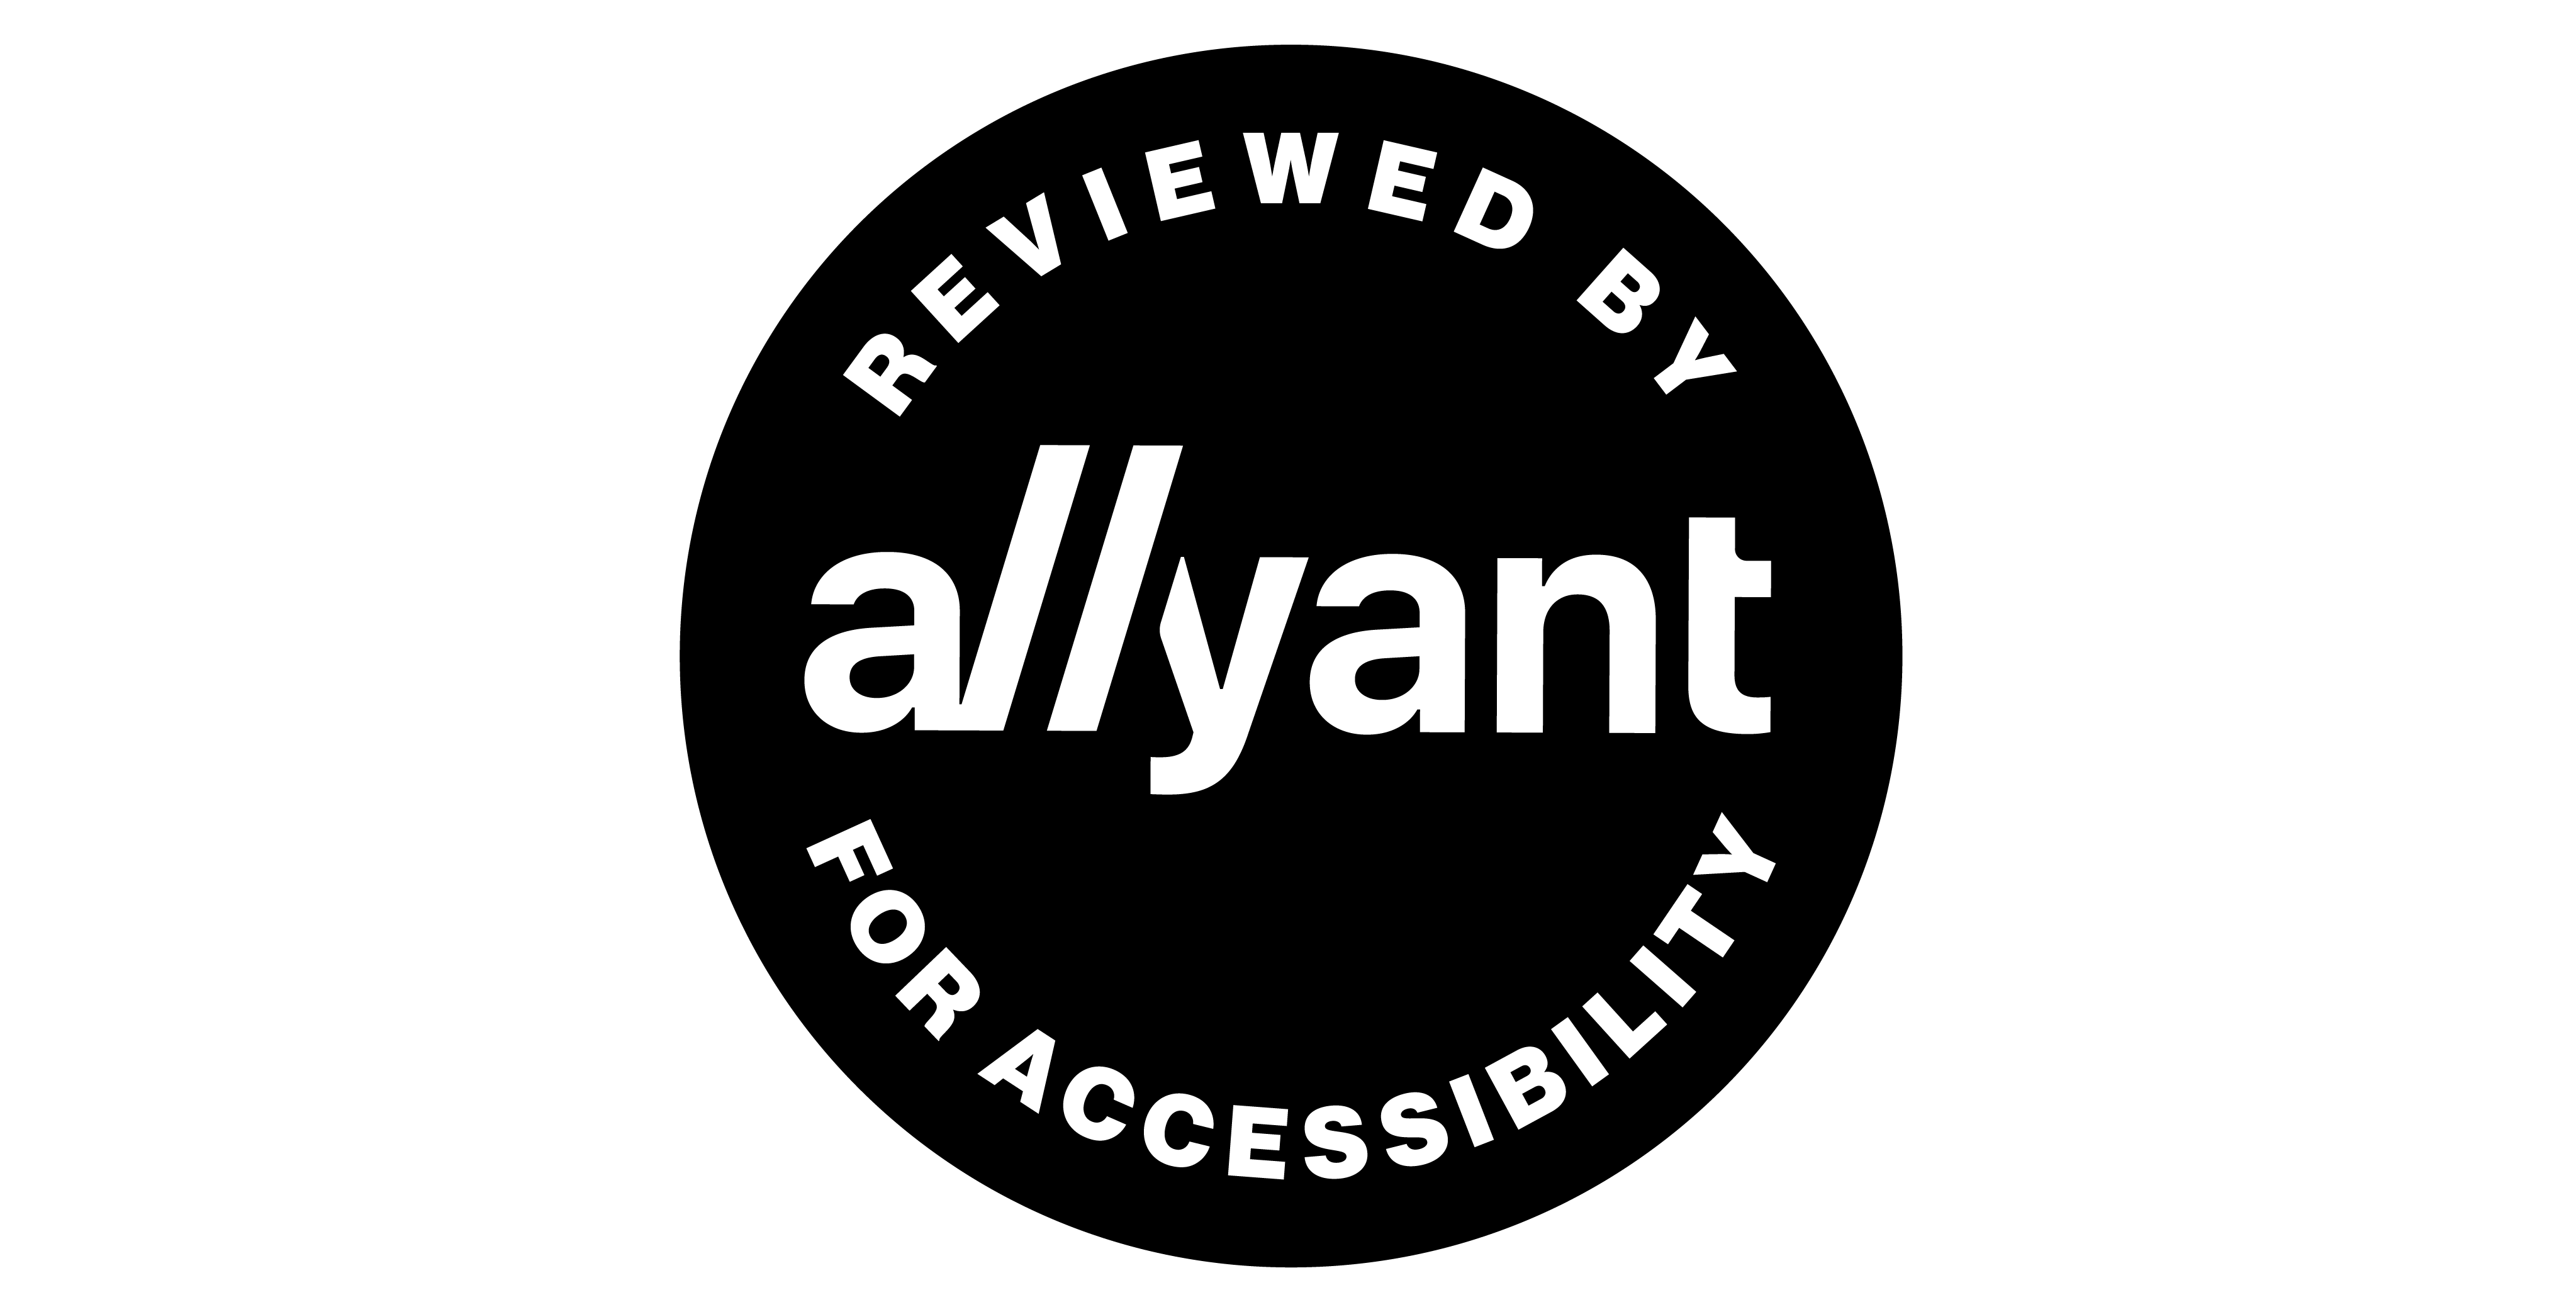 Logo that with text that reads: Reviewed by Allyant for accessibility